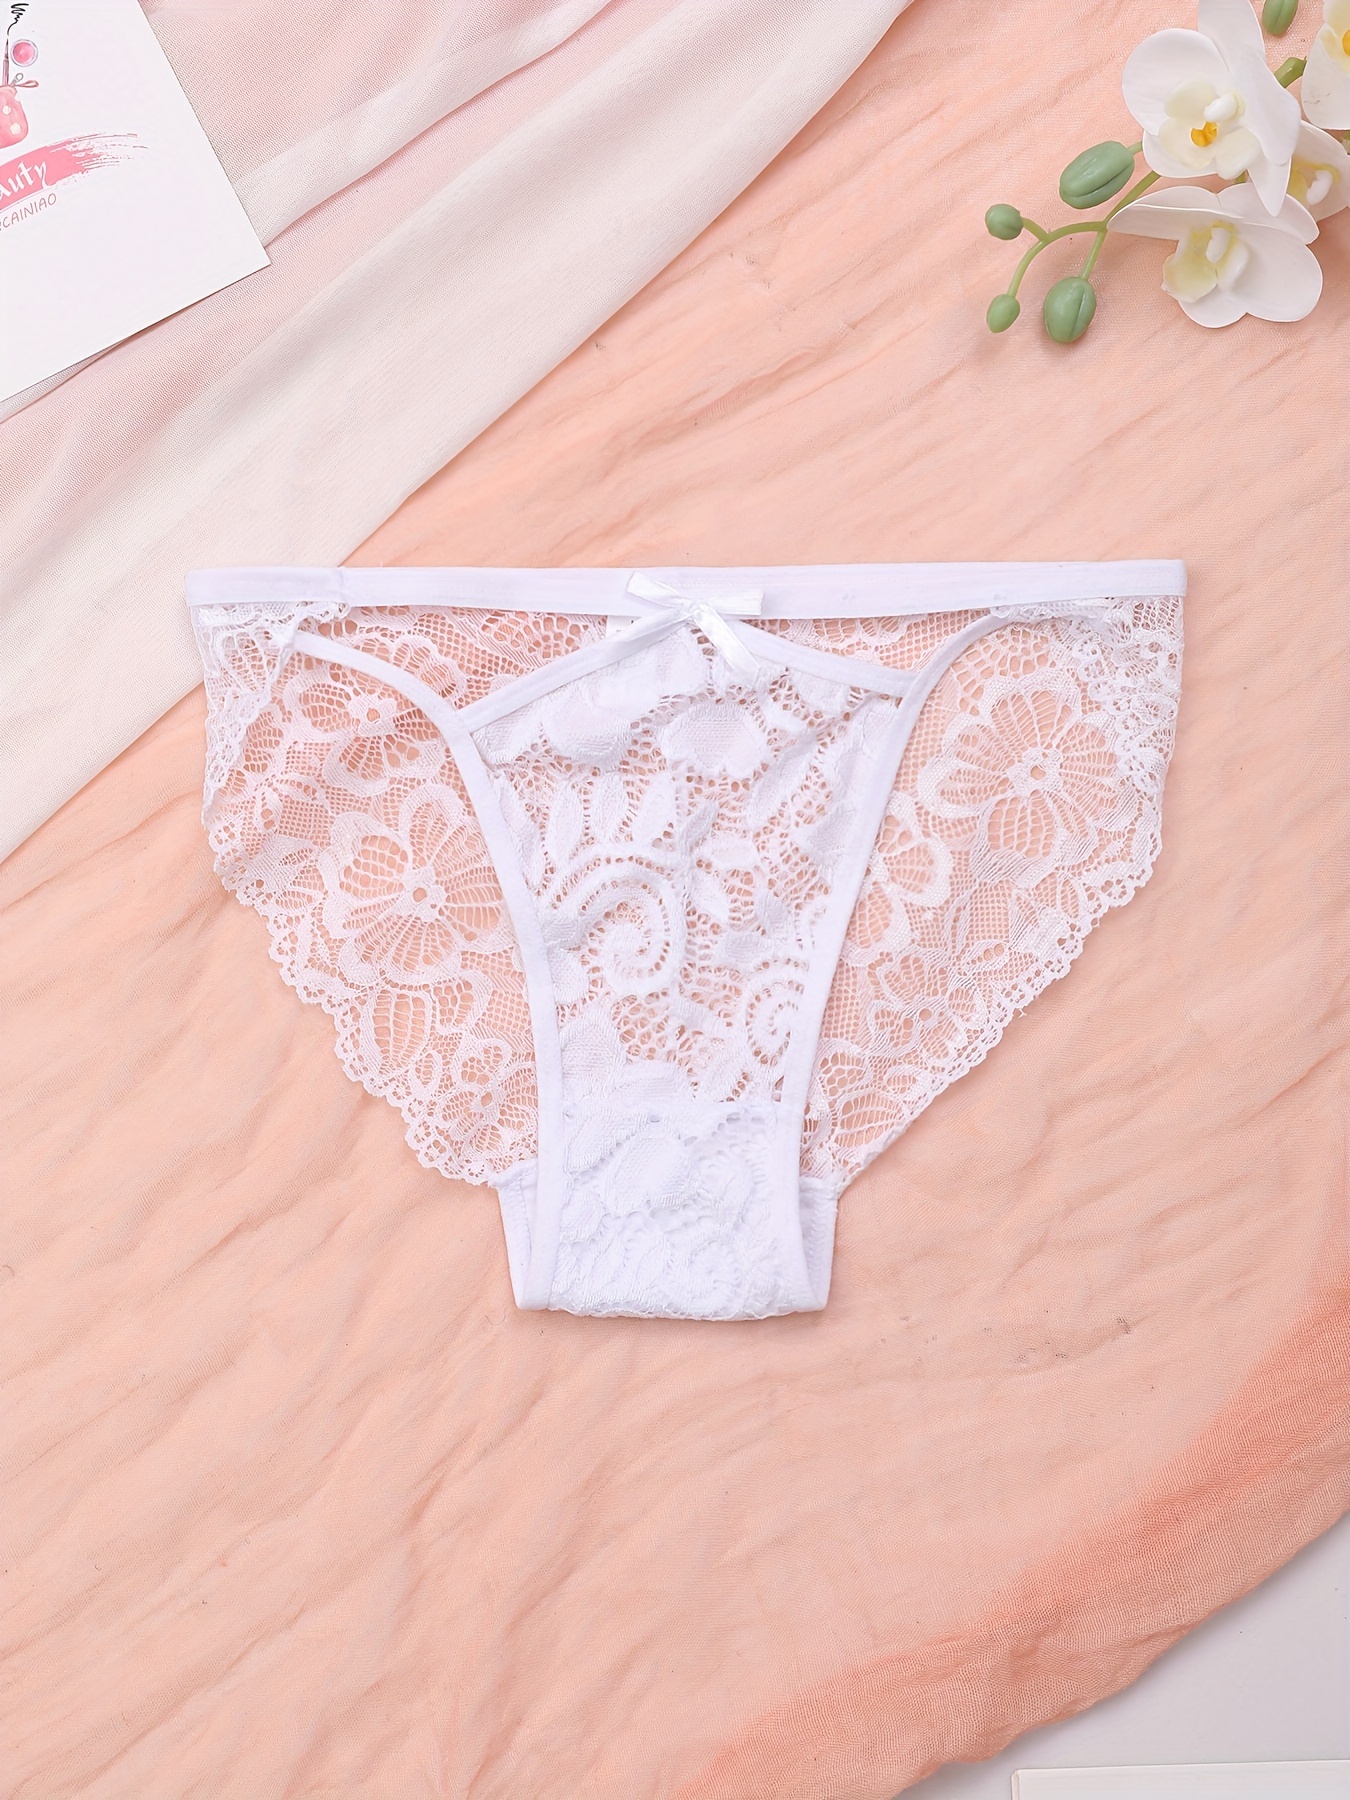 Promotion!Female Lace Underwear Lace Briefs Panties Seamless Bow